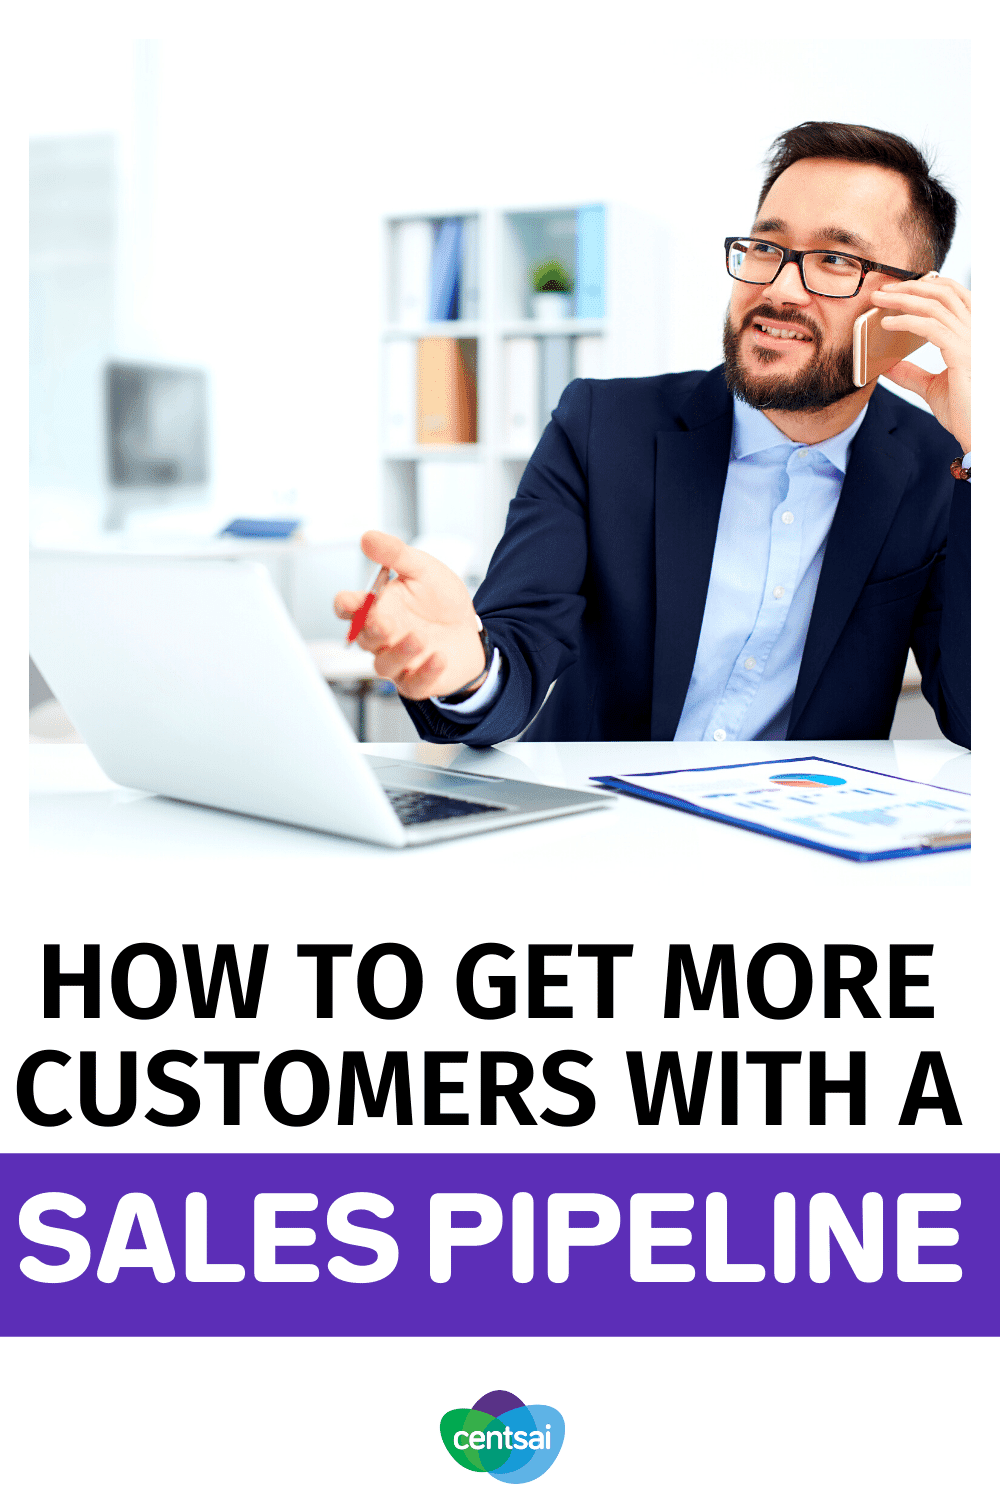 How to Get More Customers With a Sales Pipeline